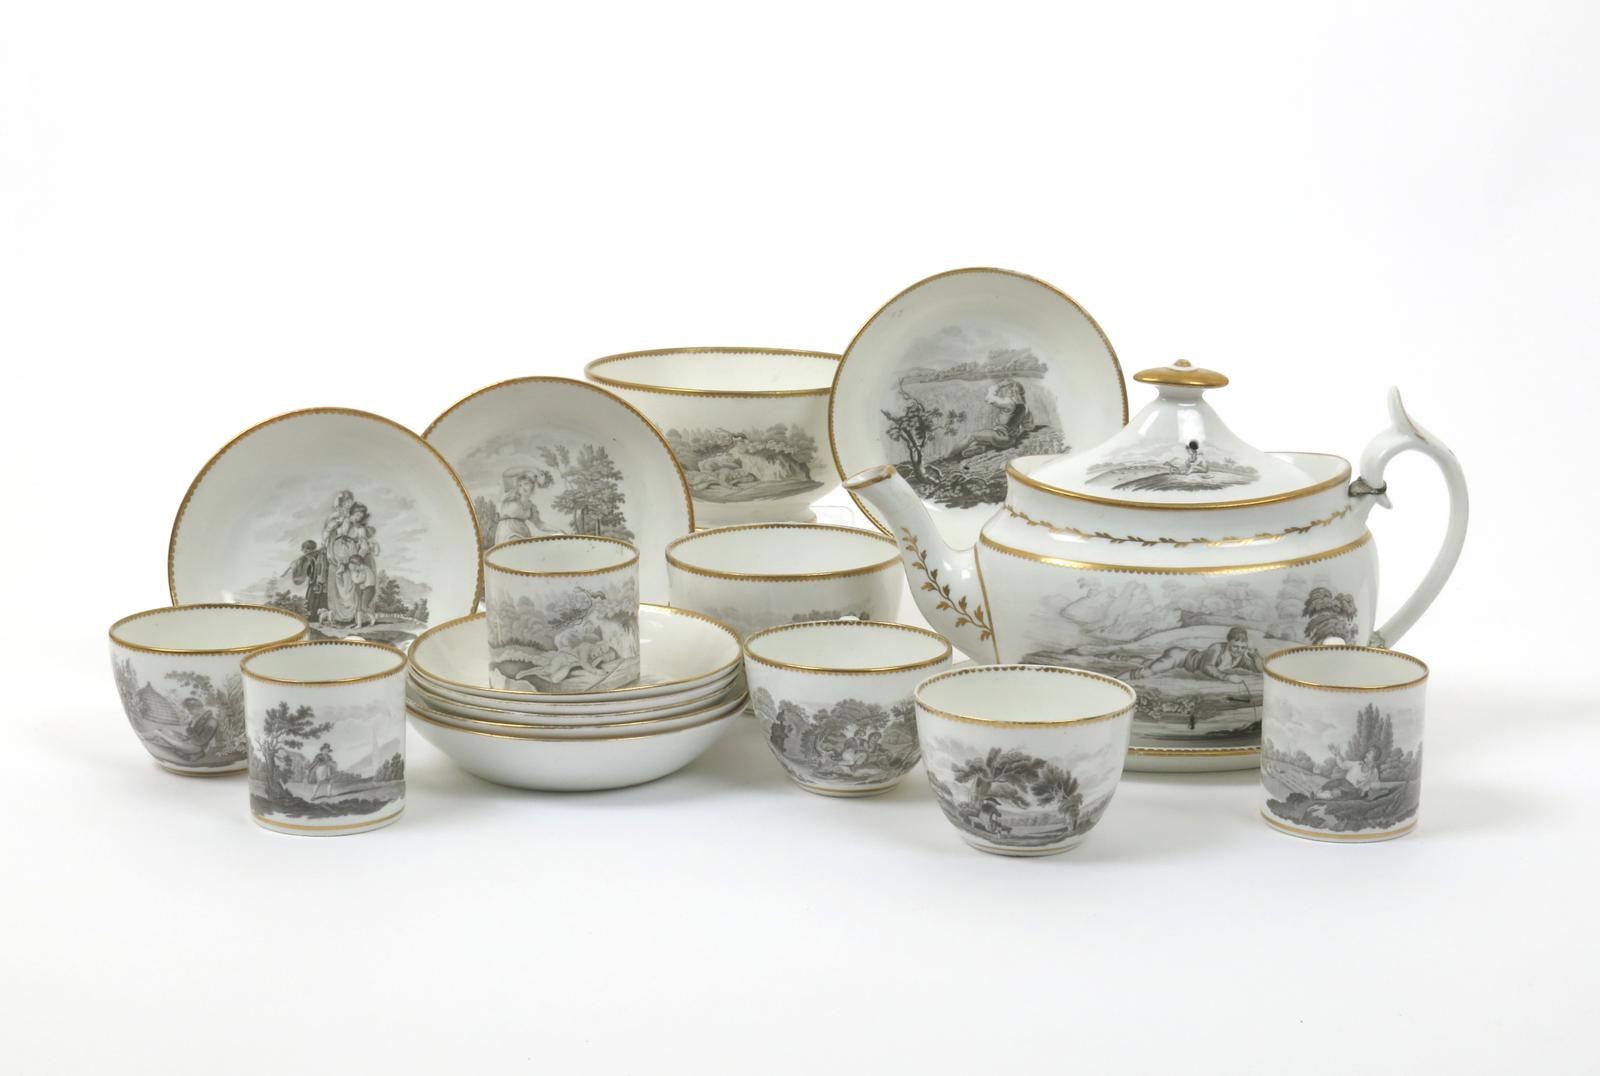 A Spode bat-printed part tea service  c.1805-10, decorated in pattern 1922 with black monochrome